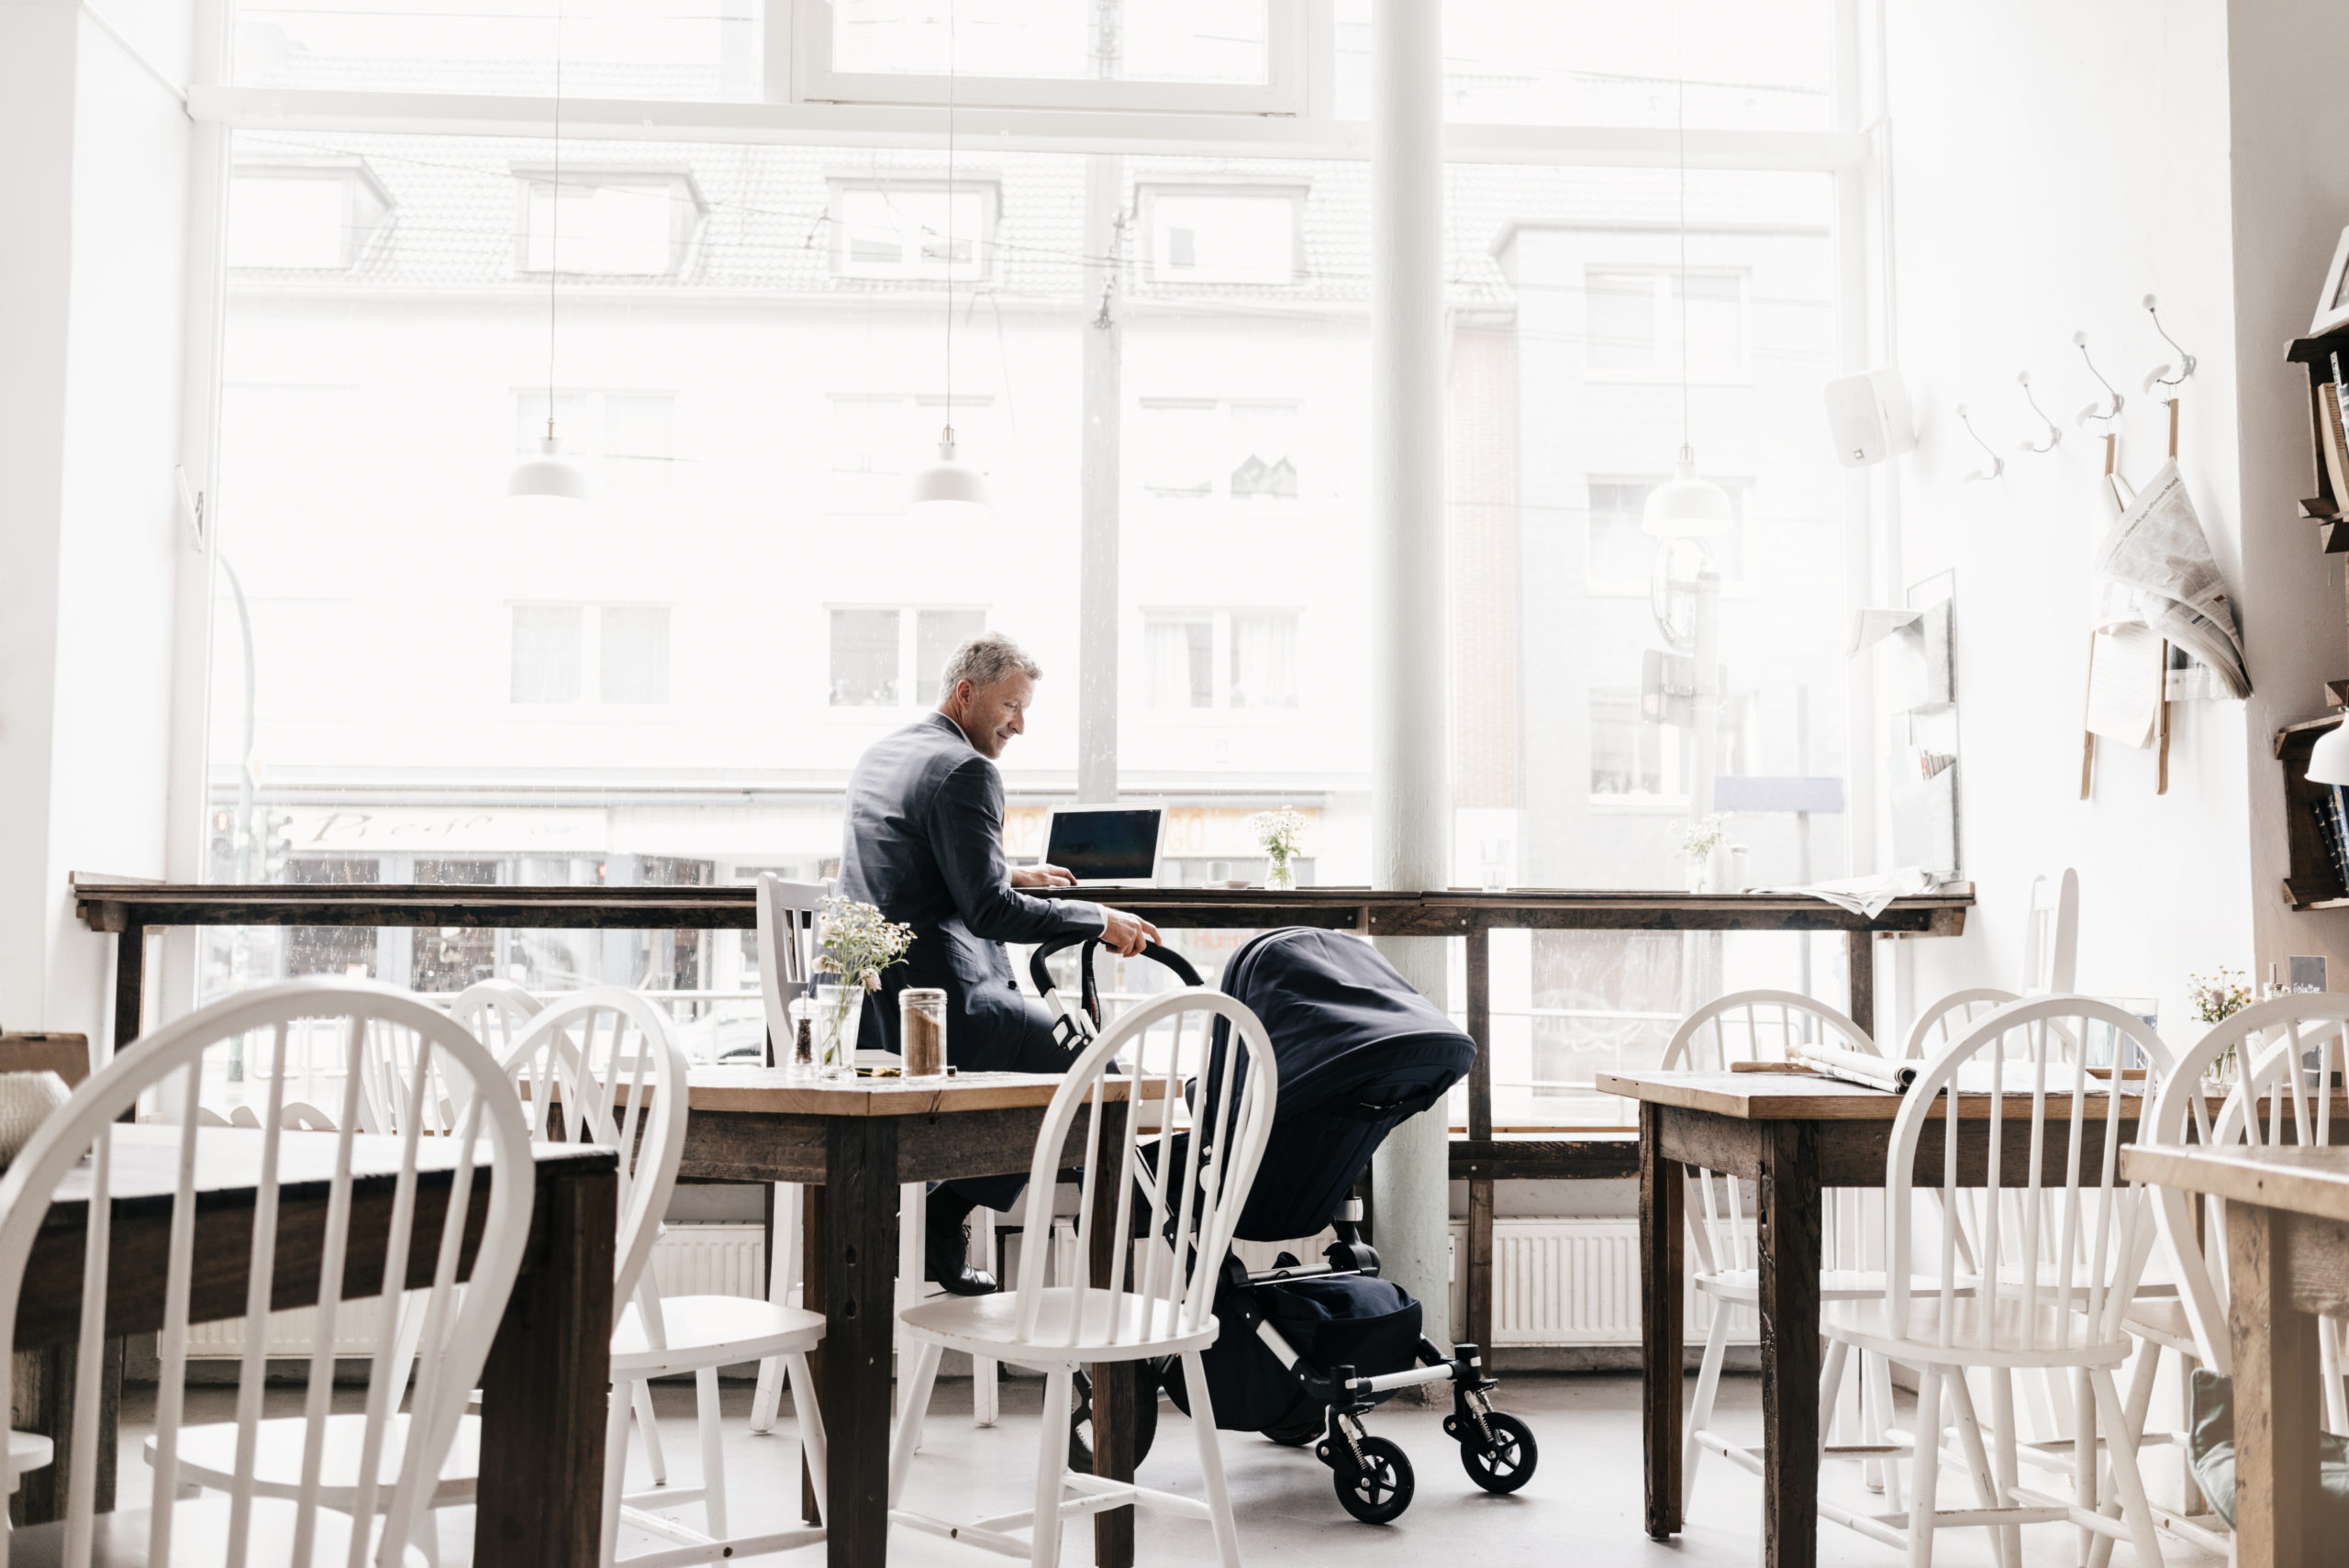 Businessman sitting in cafe with stroller.